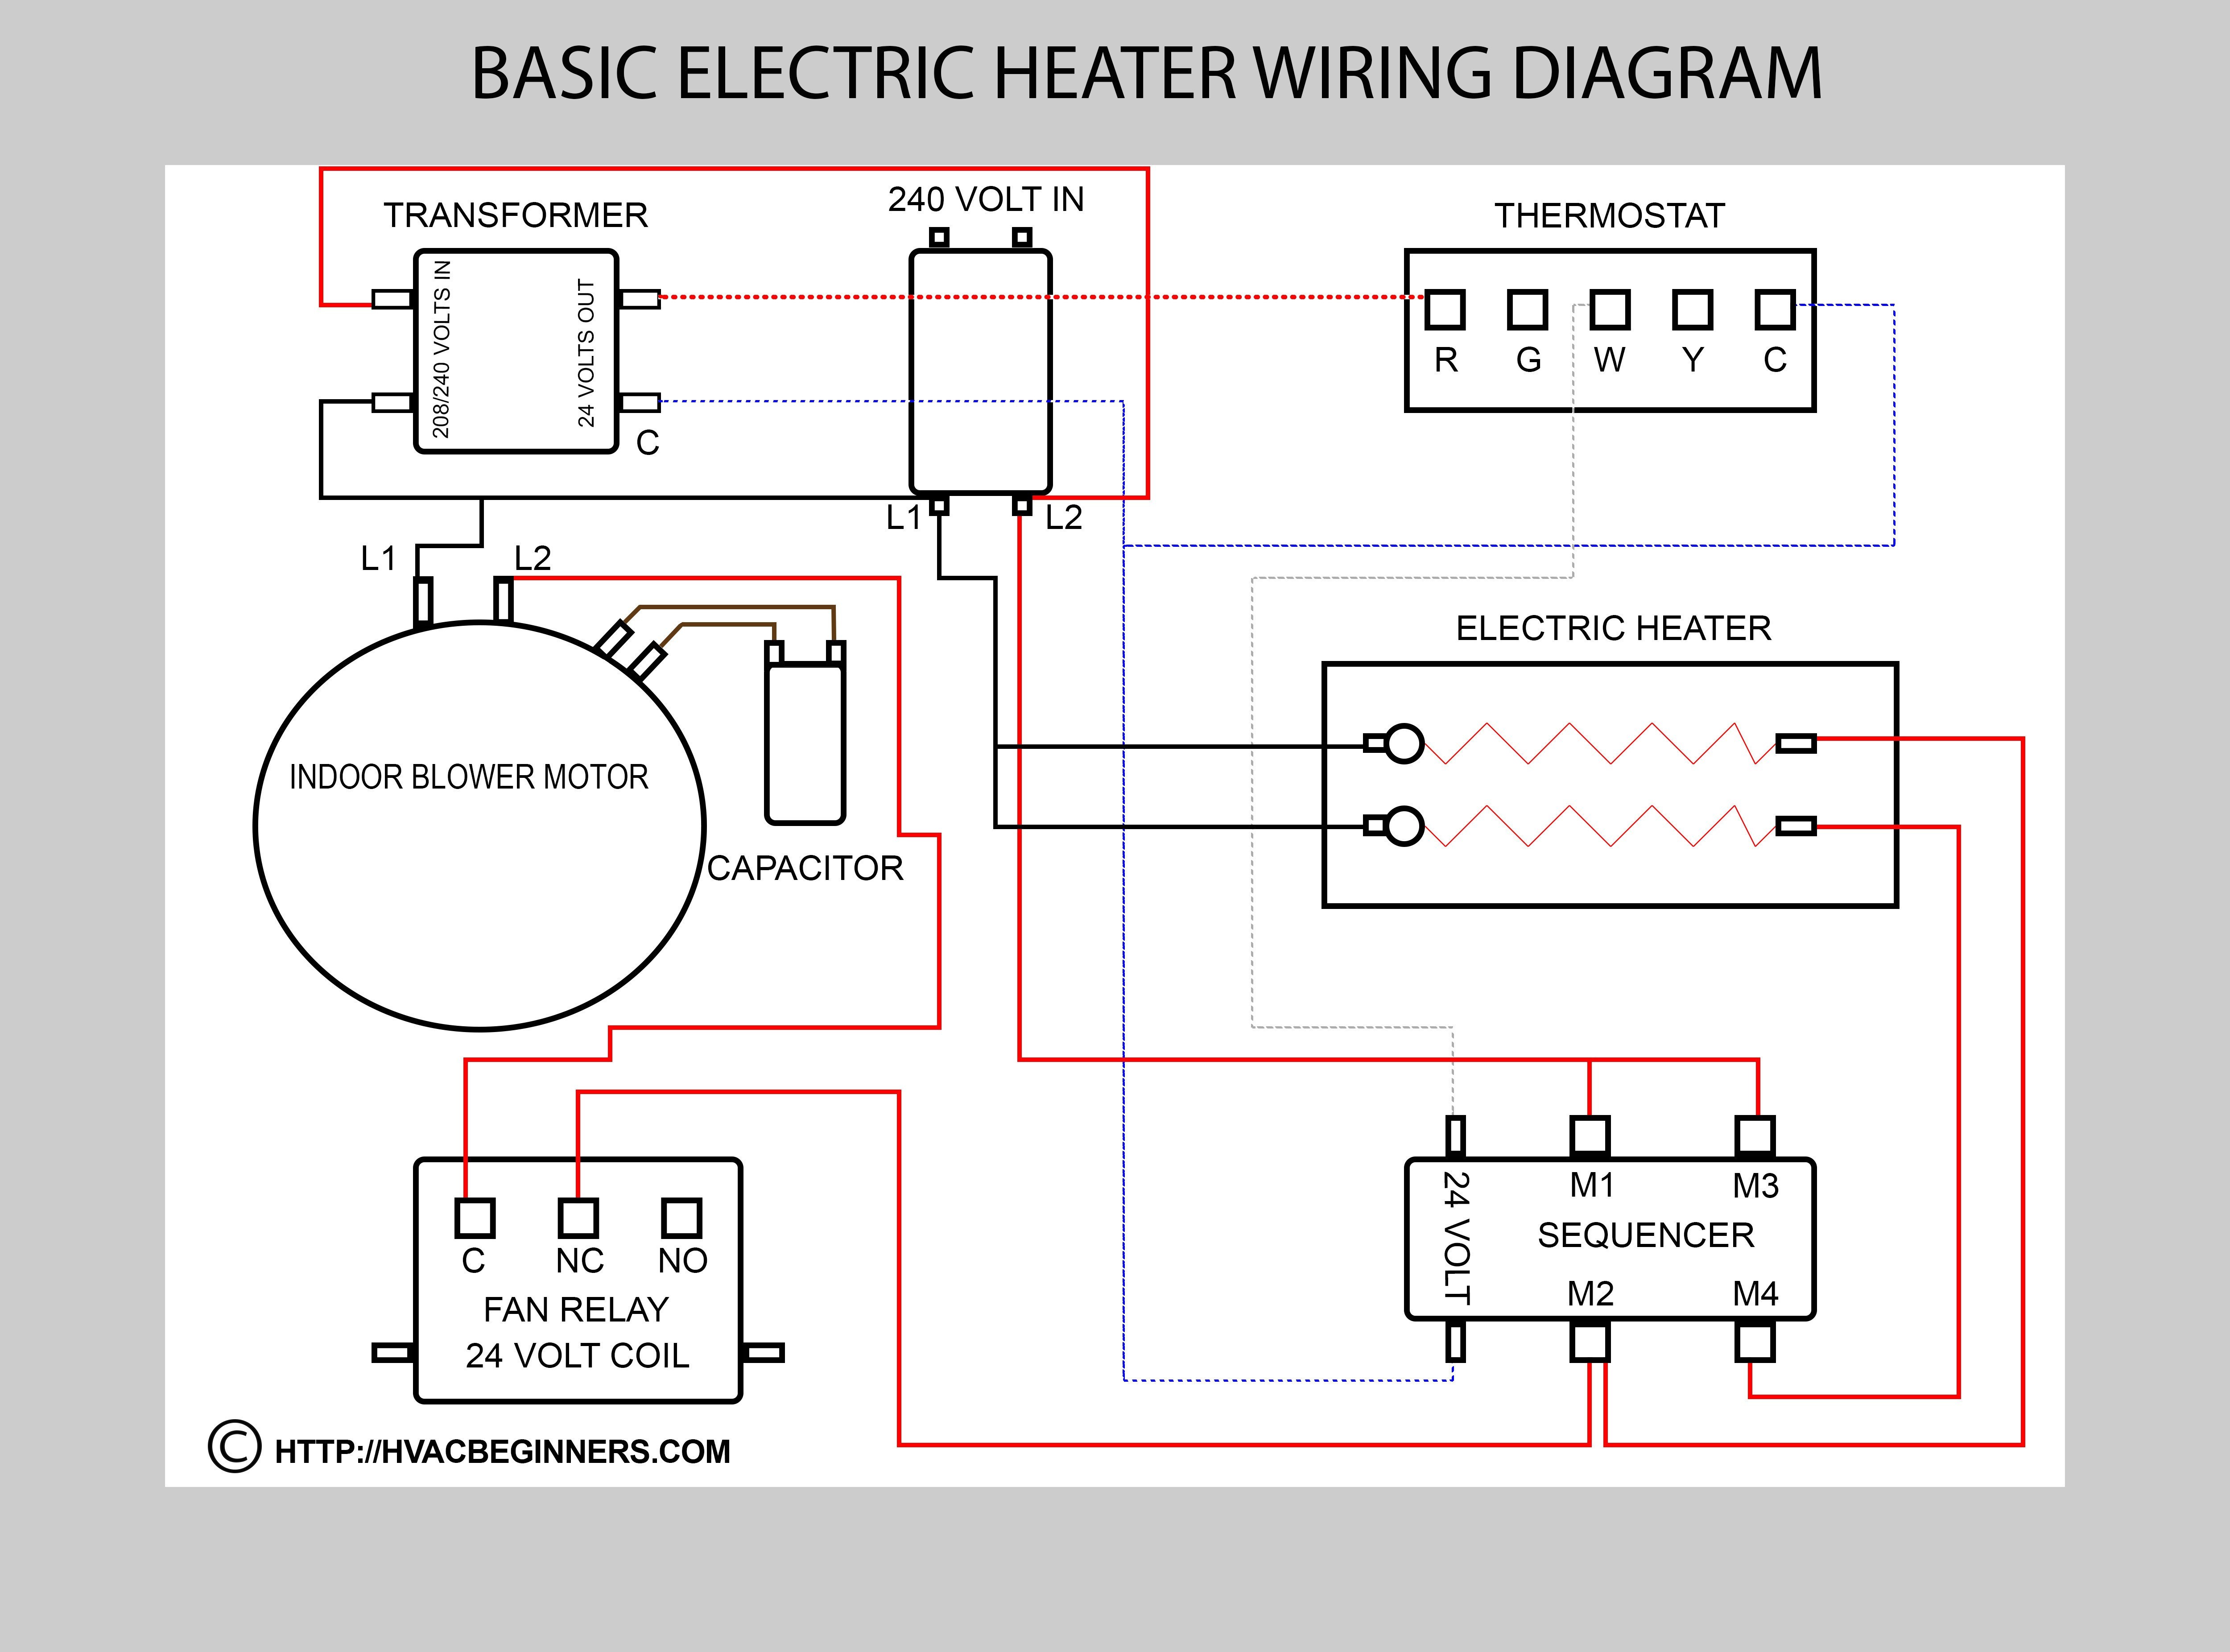 Nest Wiring Diagram New Inspirational Wiring Diagram for Nest thermostat 3rd Generation